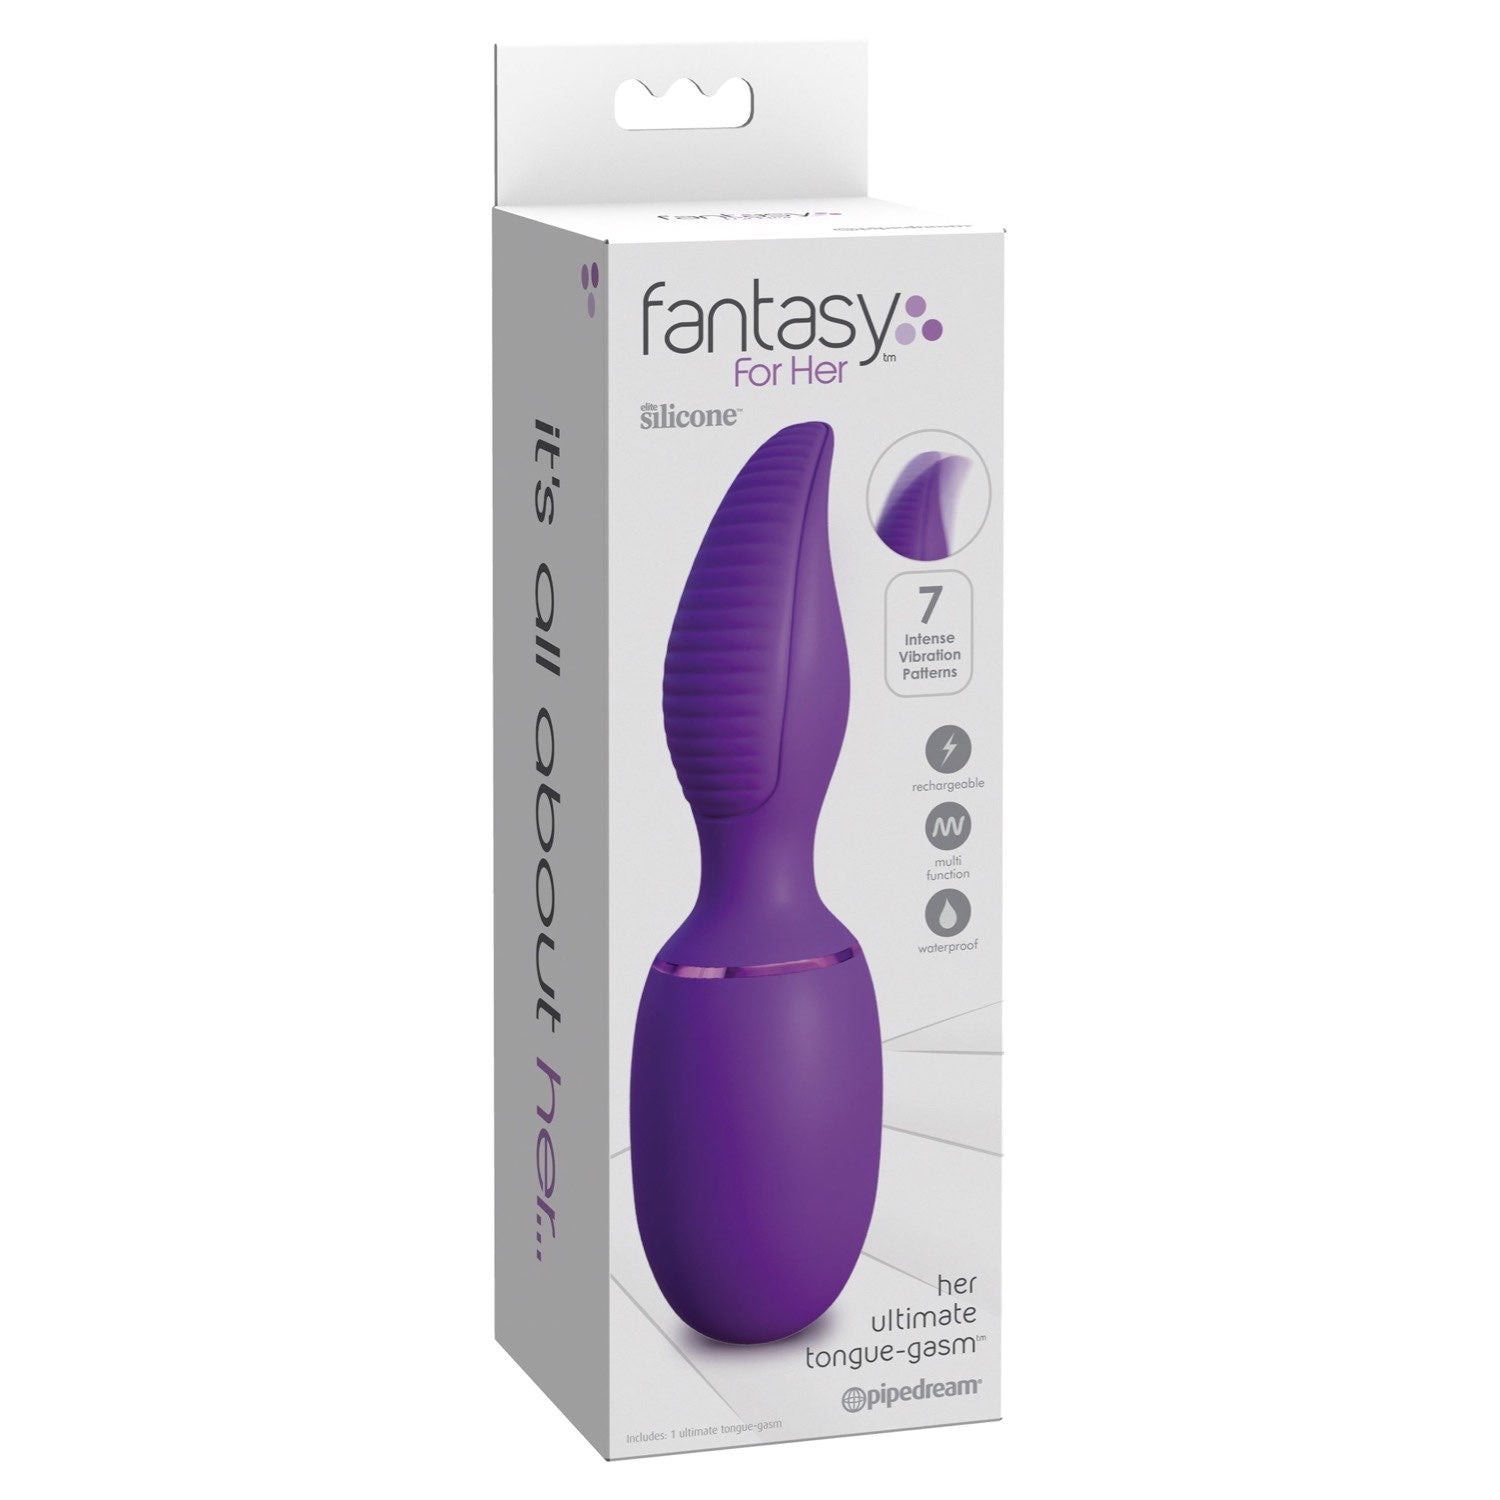 Fantasy For Her Ultimate Tongue-Gasm - Purple Flicking Stimulator by Pipedream